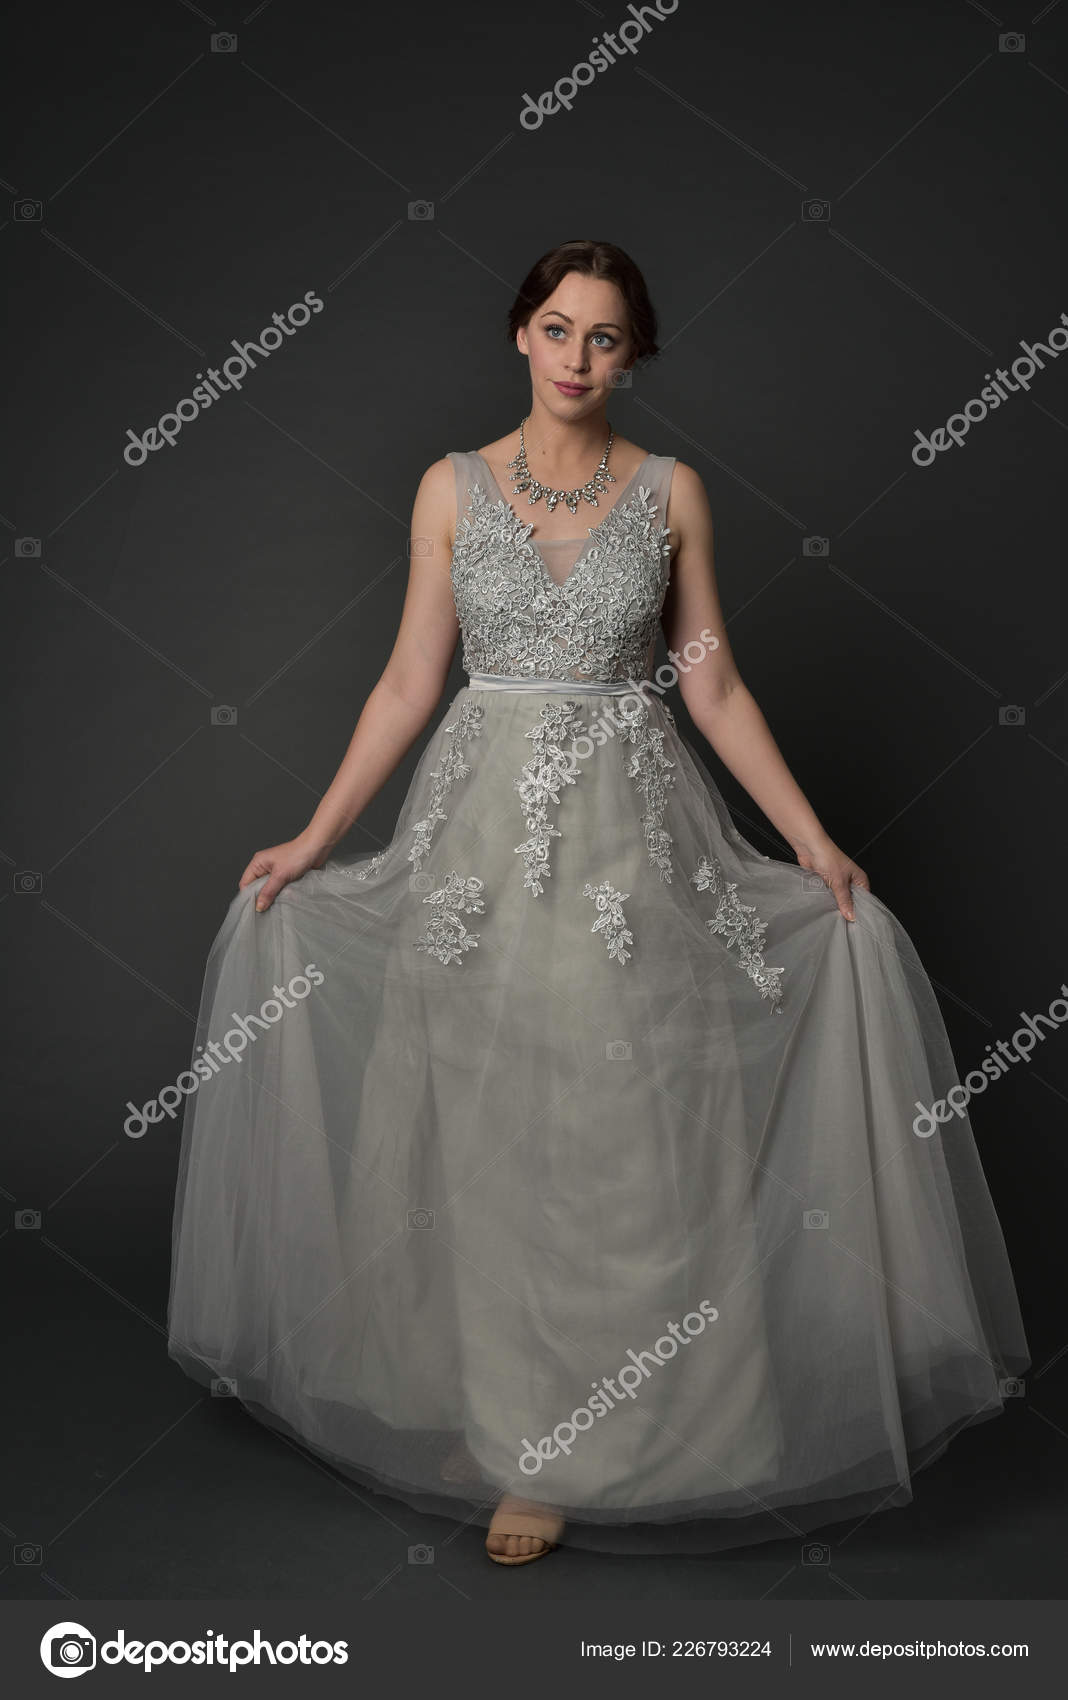 Elegant woman in blue ball gown dress standing and posing on a sunny evening  at city street. Fashion model full length portrait Stock Photo - Alamy